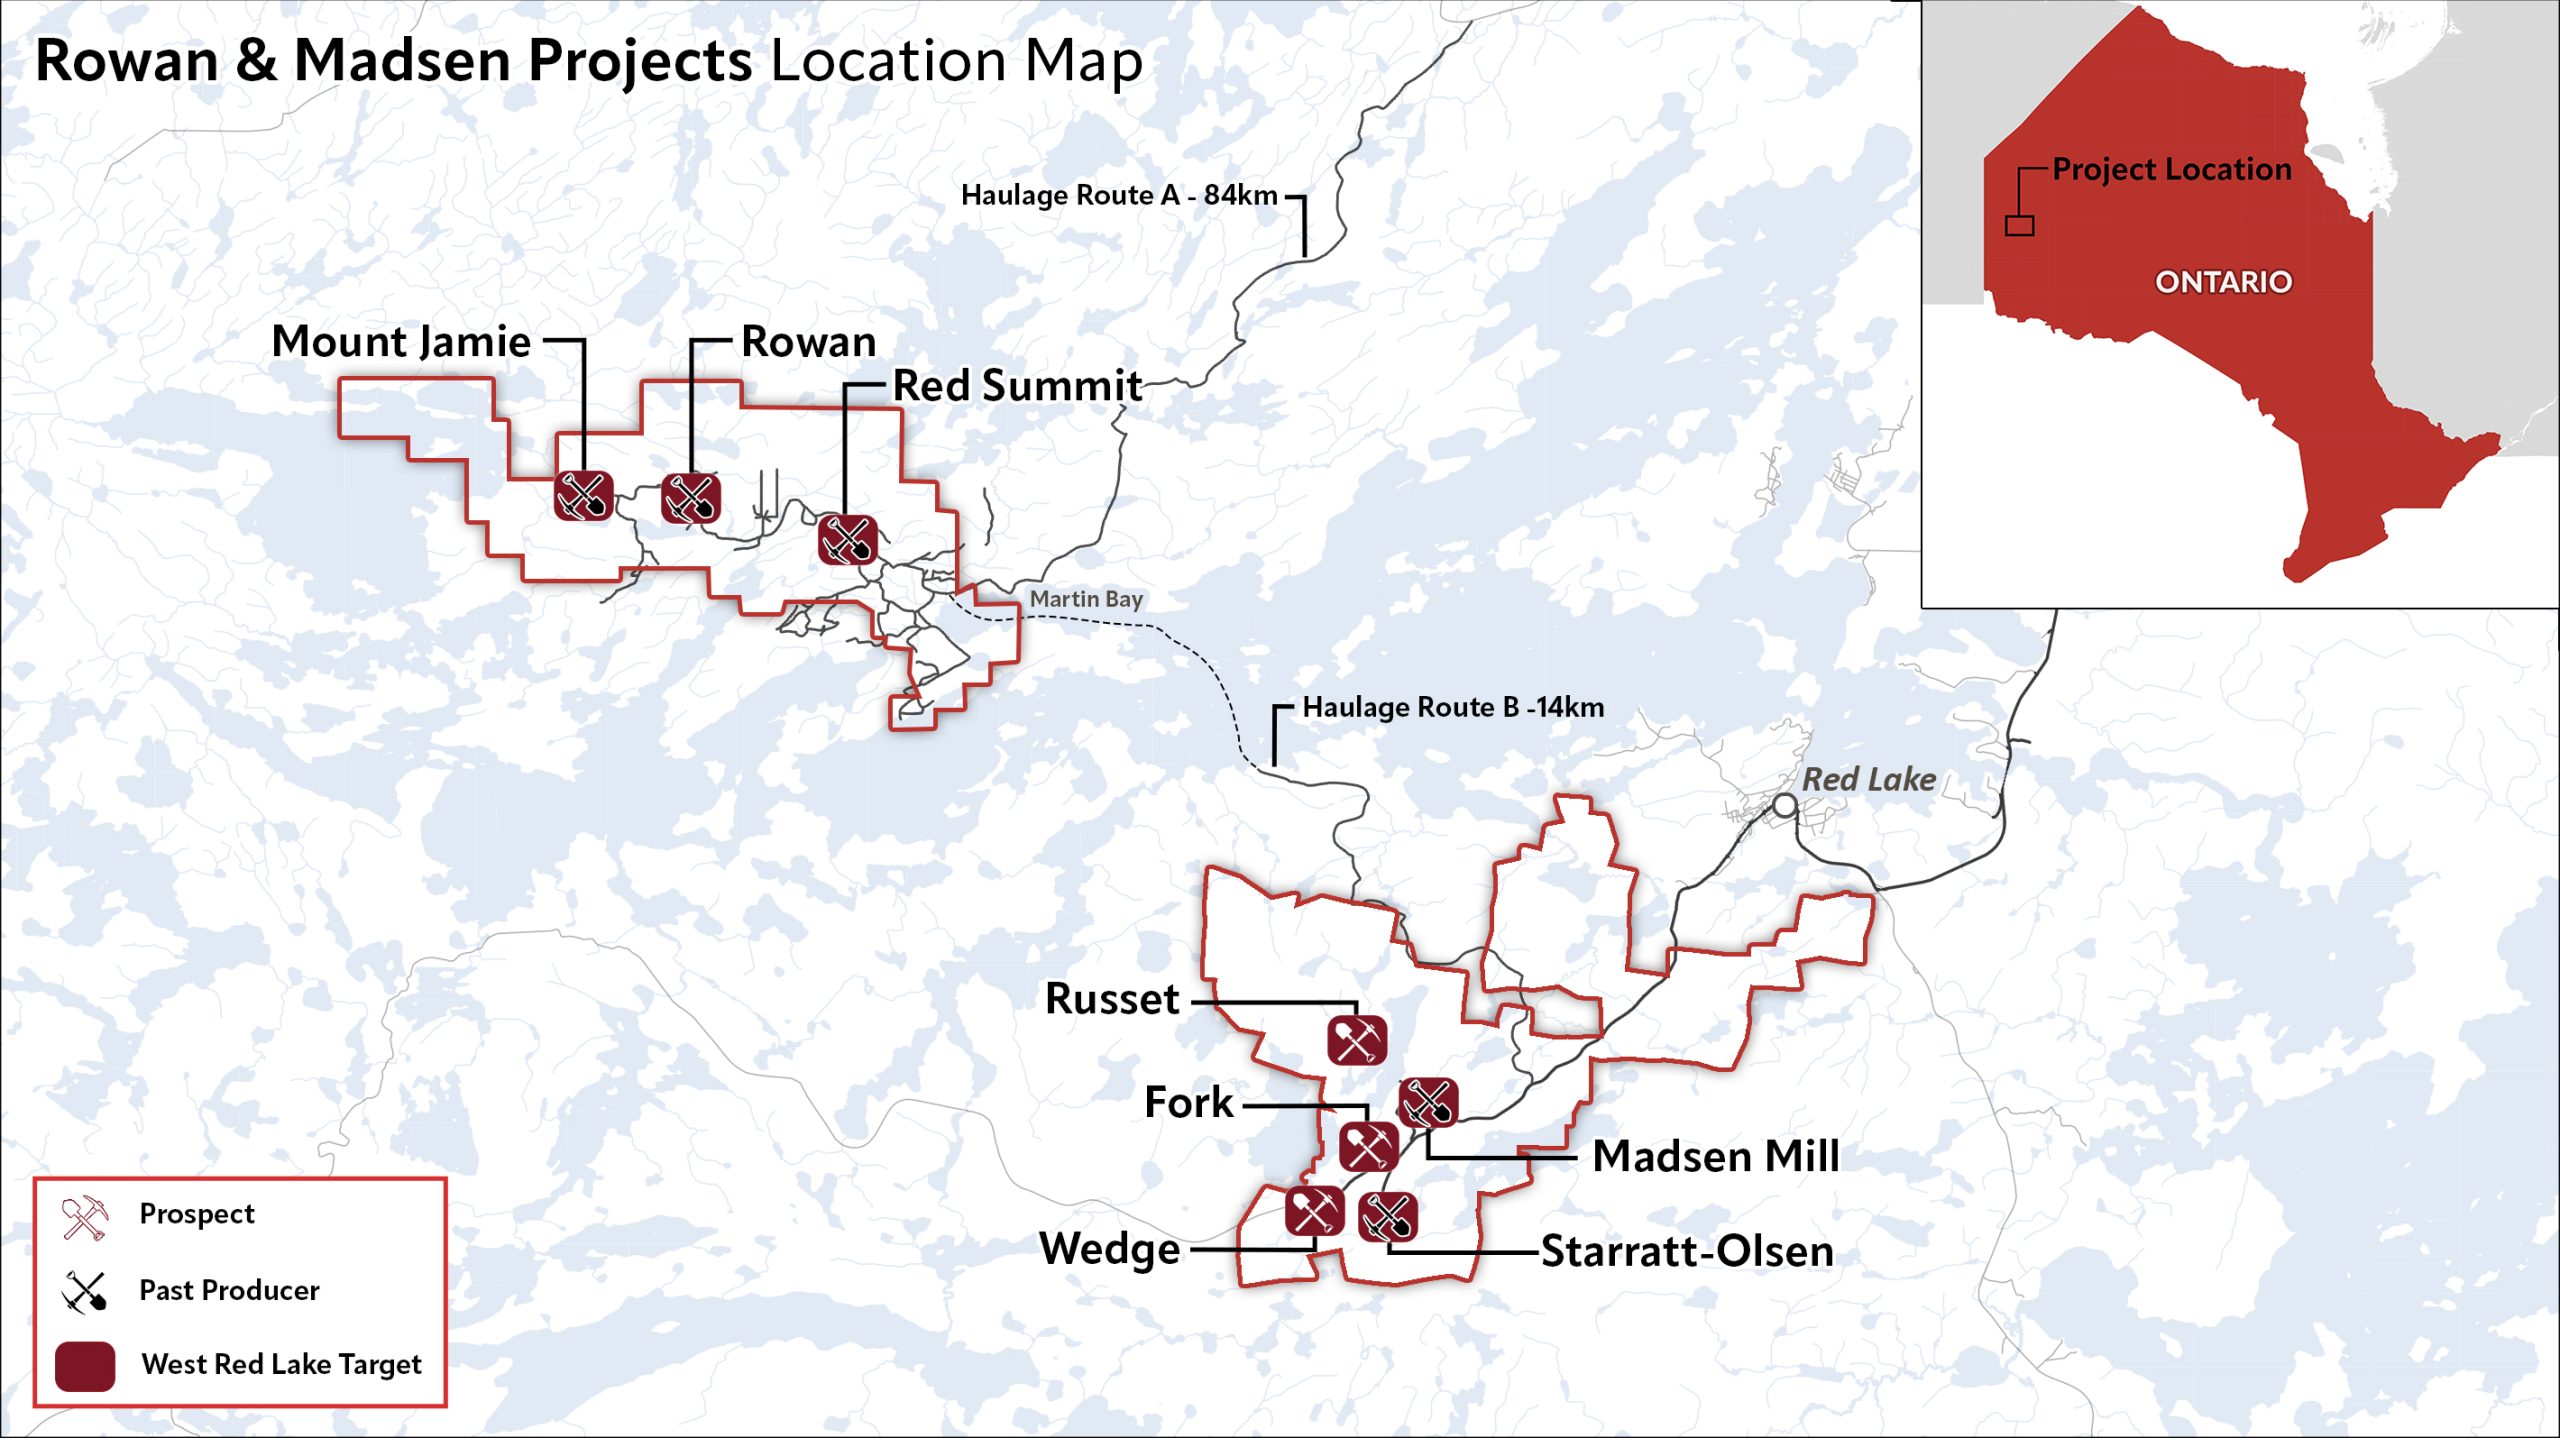 Rowan Madsen Project scaled West Red Lake Gold Intersects 37.33 g/t Au over 2.79m and 5.26 g/t Au over 9.0m at North Austin Zone – Madsen Mine